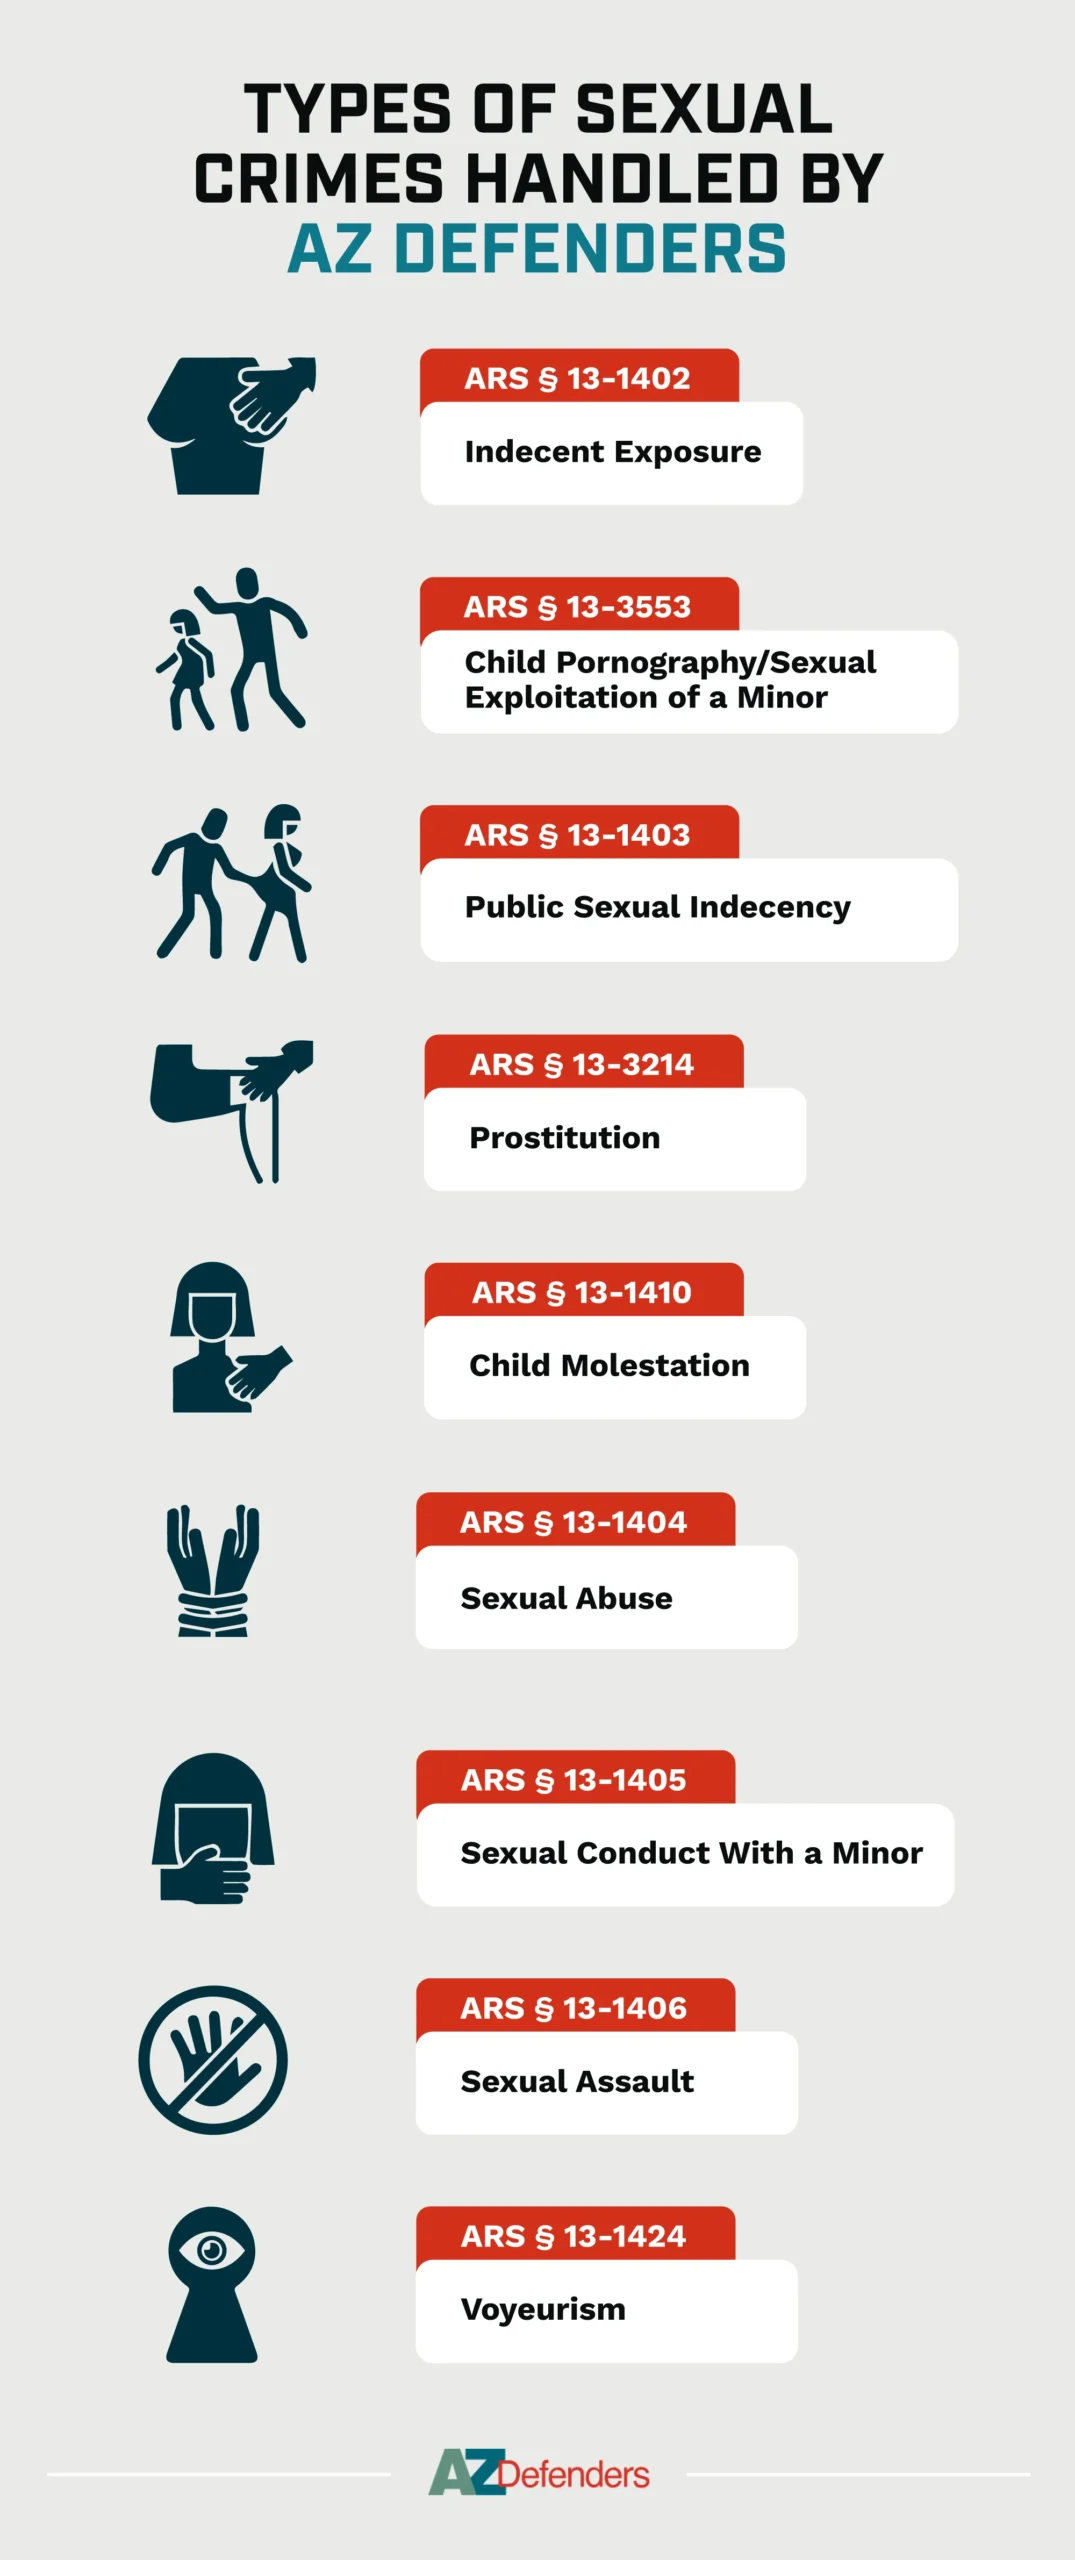 Types of sexual crimes handled by AZ defenders